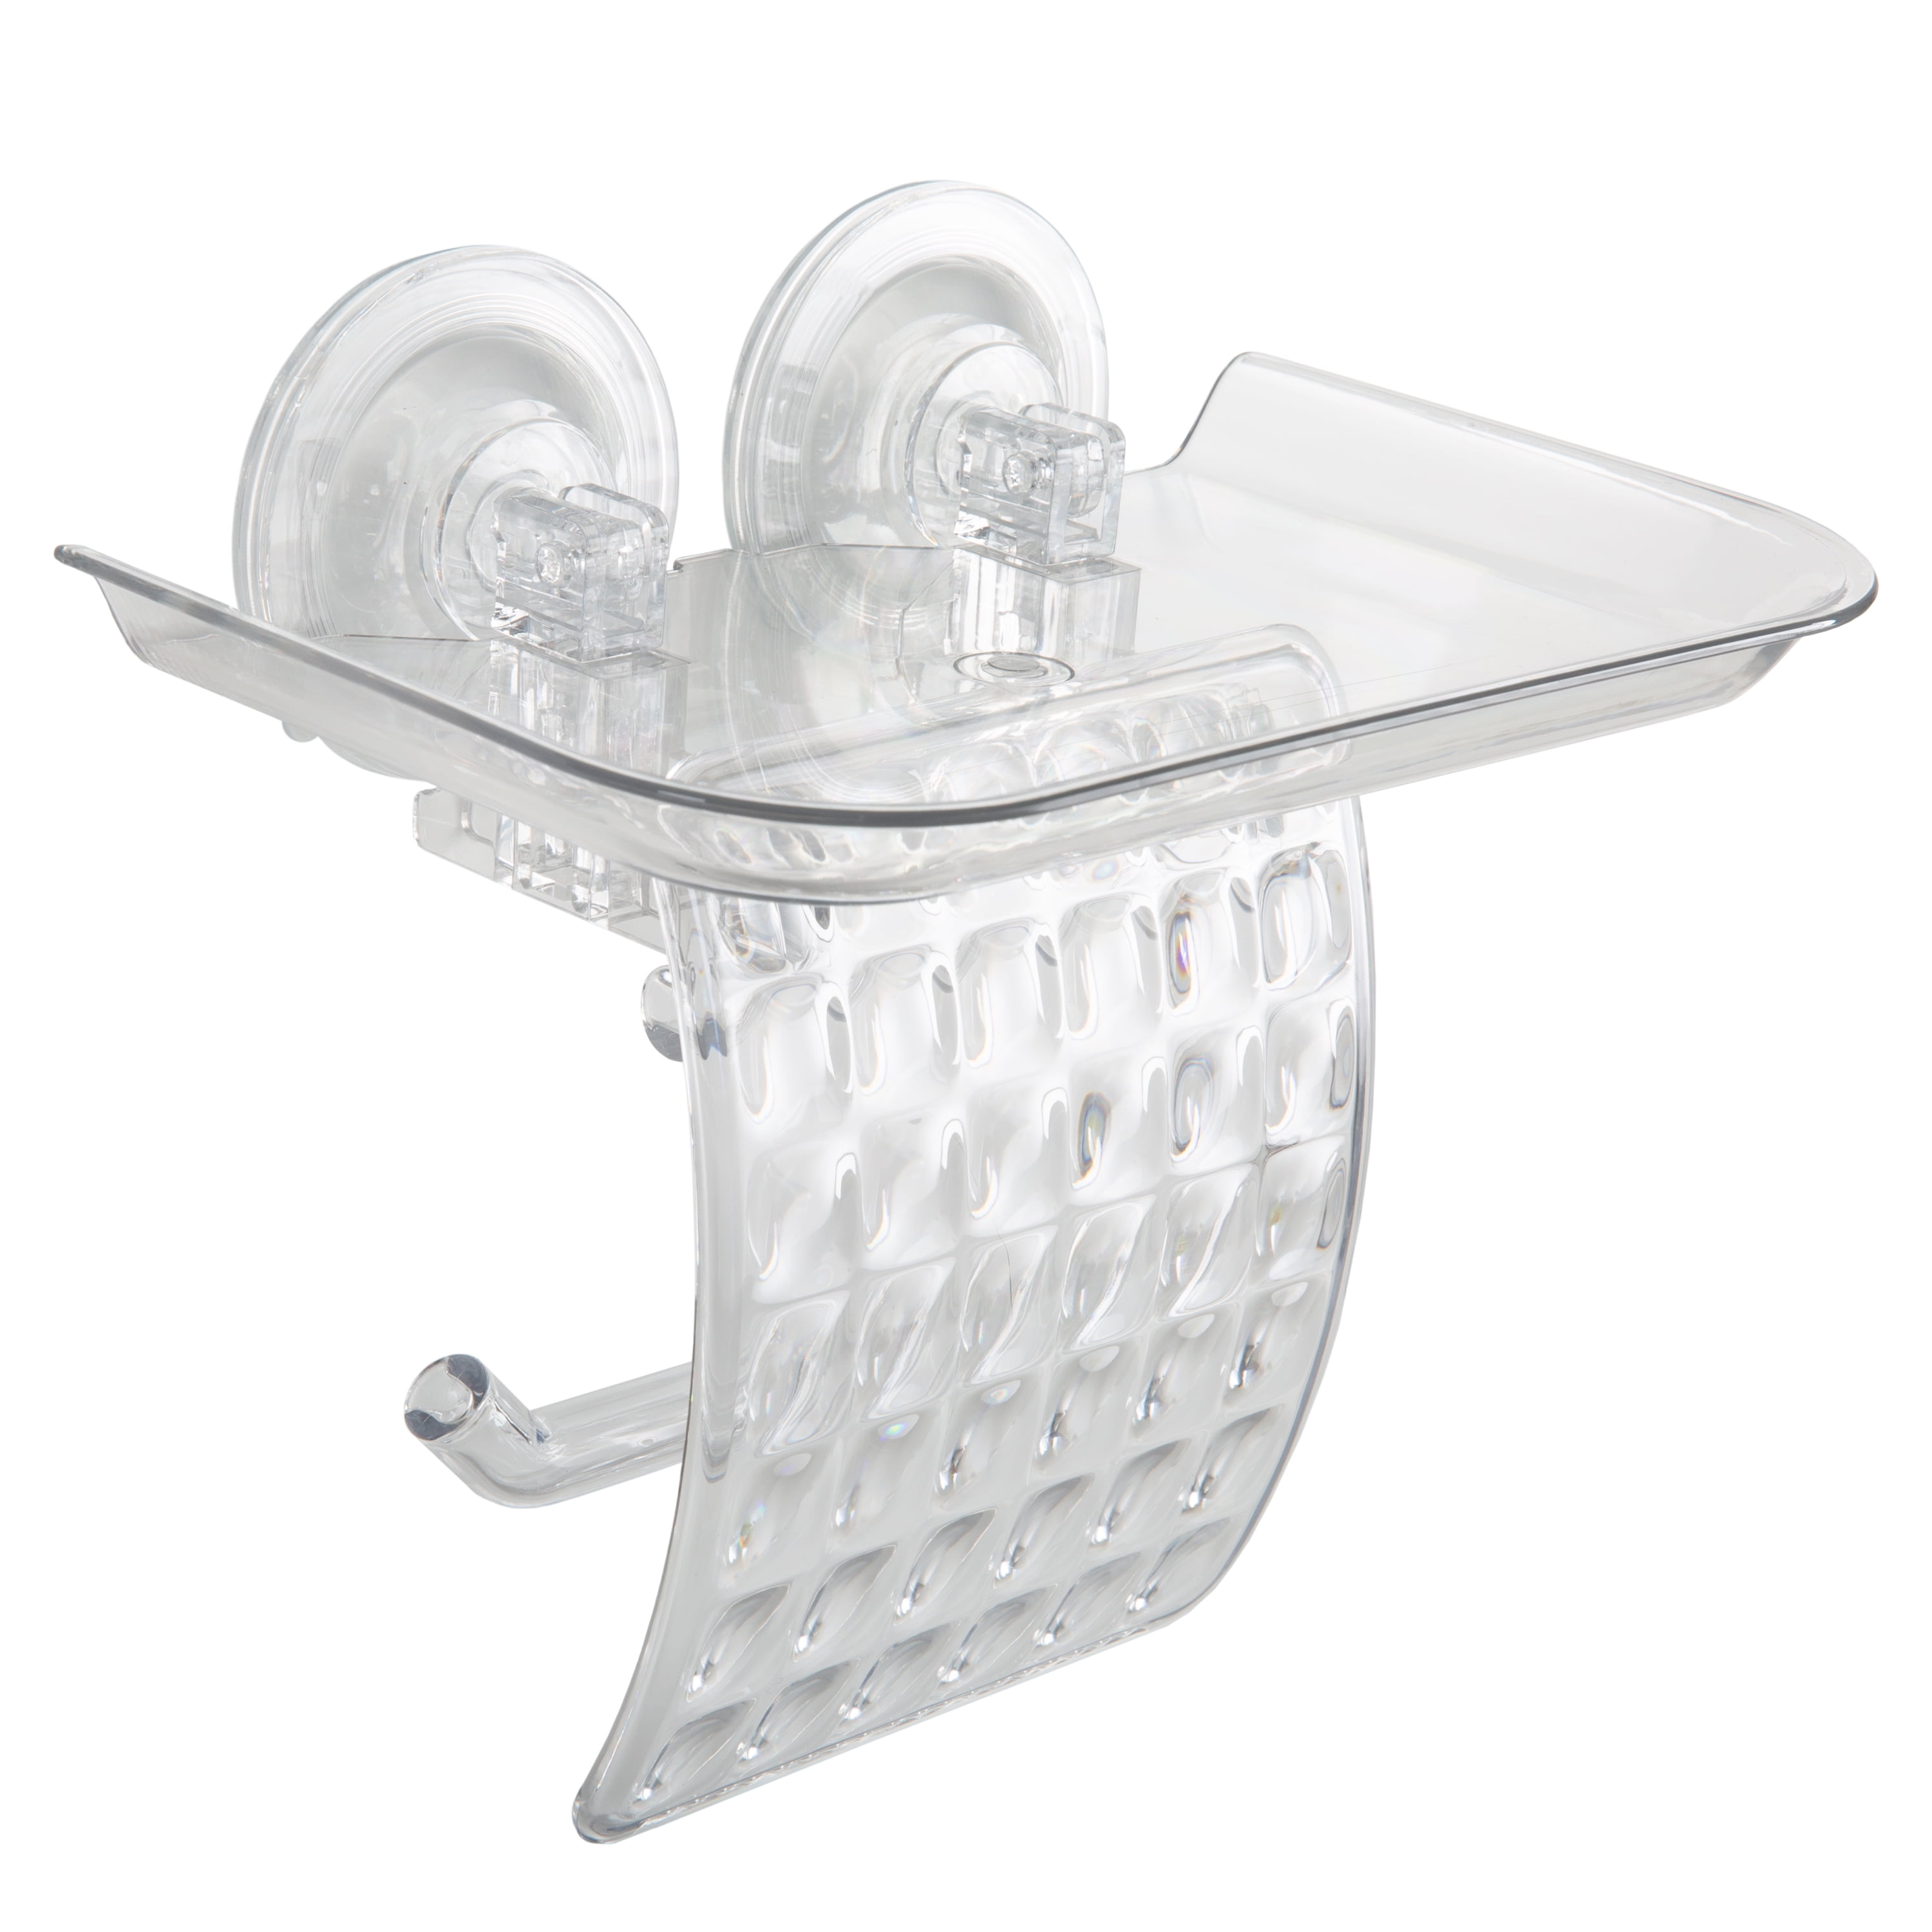 Bath Bliss Power Locking Suction Soap Dish - Clear, Shower-mounted